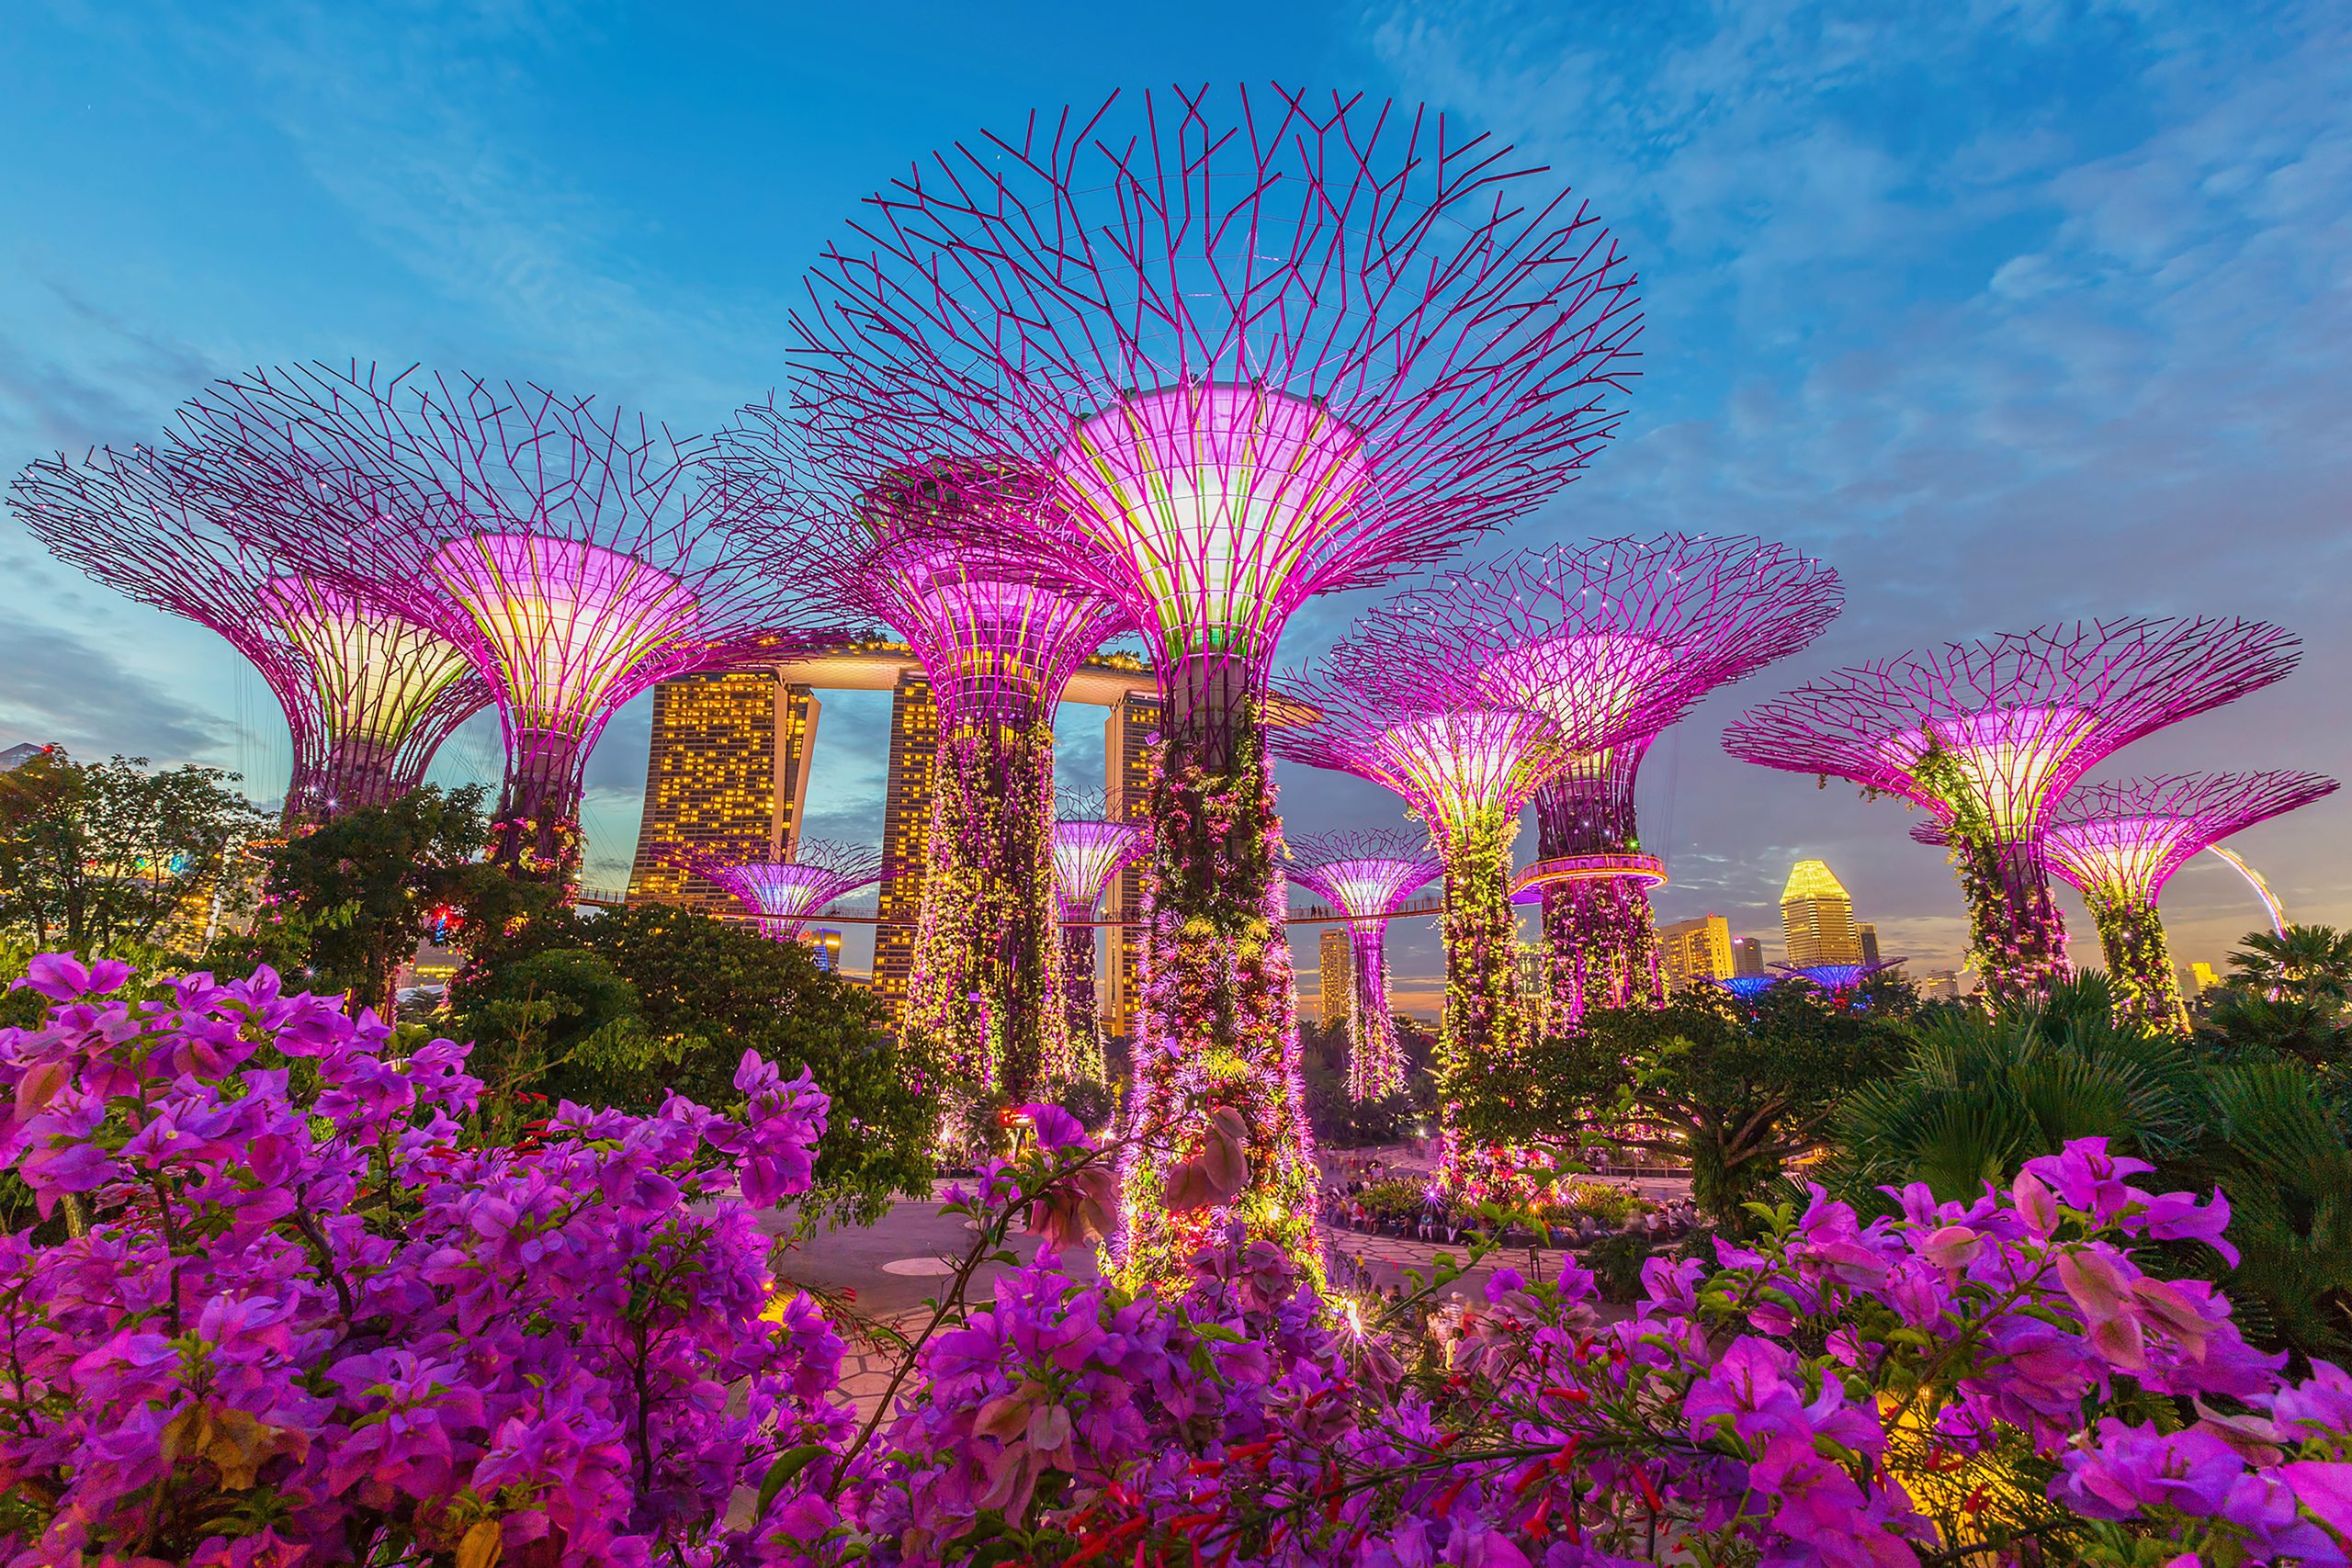 Cruise like a royal onboard Queen Elizabeth including two nights in Singapore for $208 a night per person